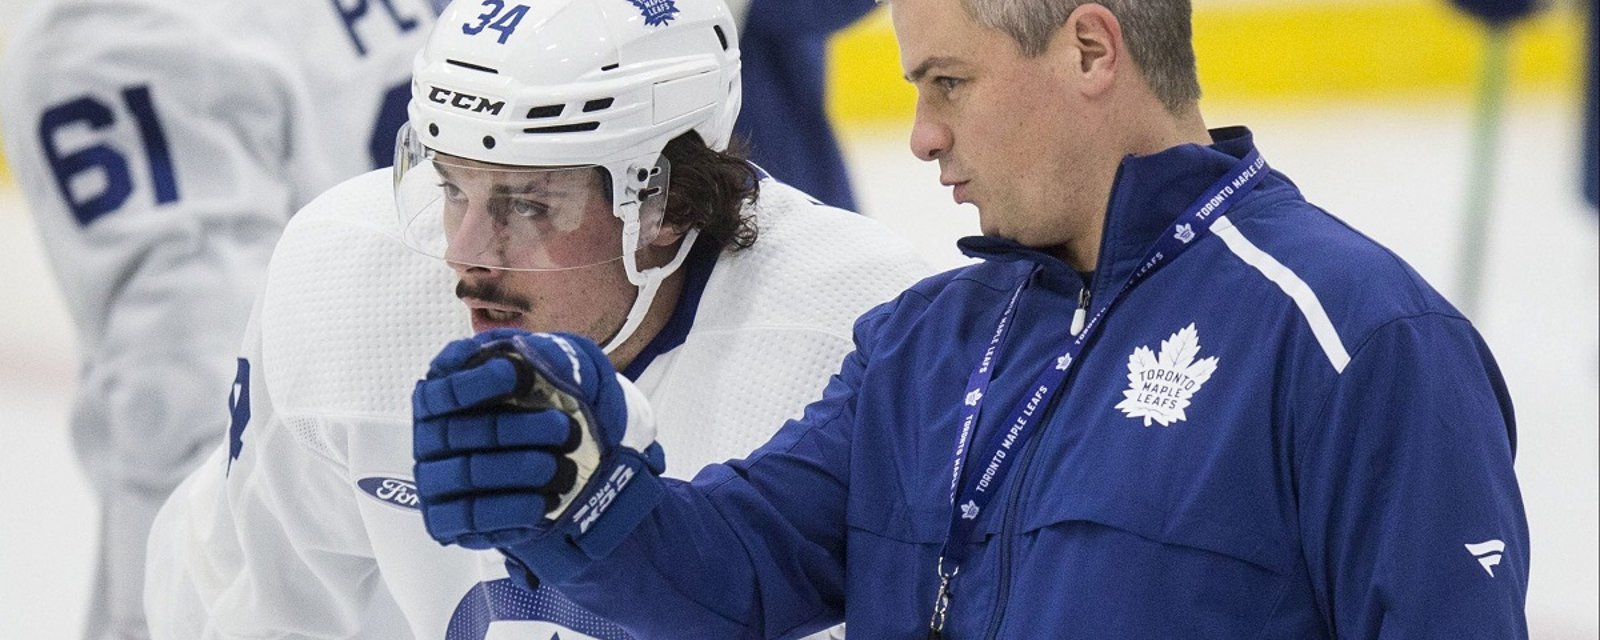 Sheldon Keefe expected to sign extension with Maple Leafs.